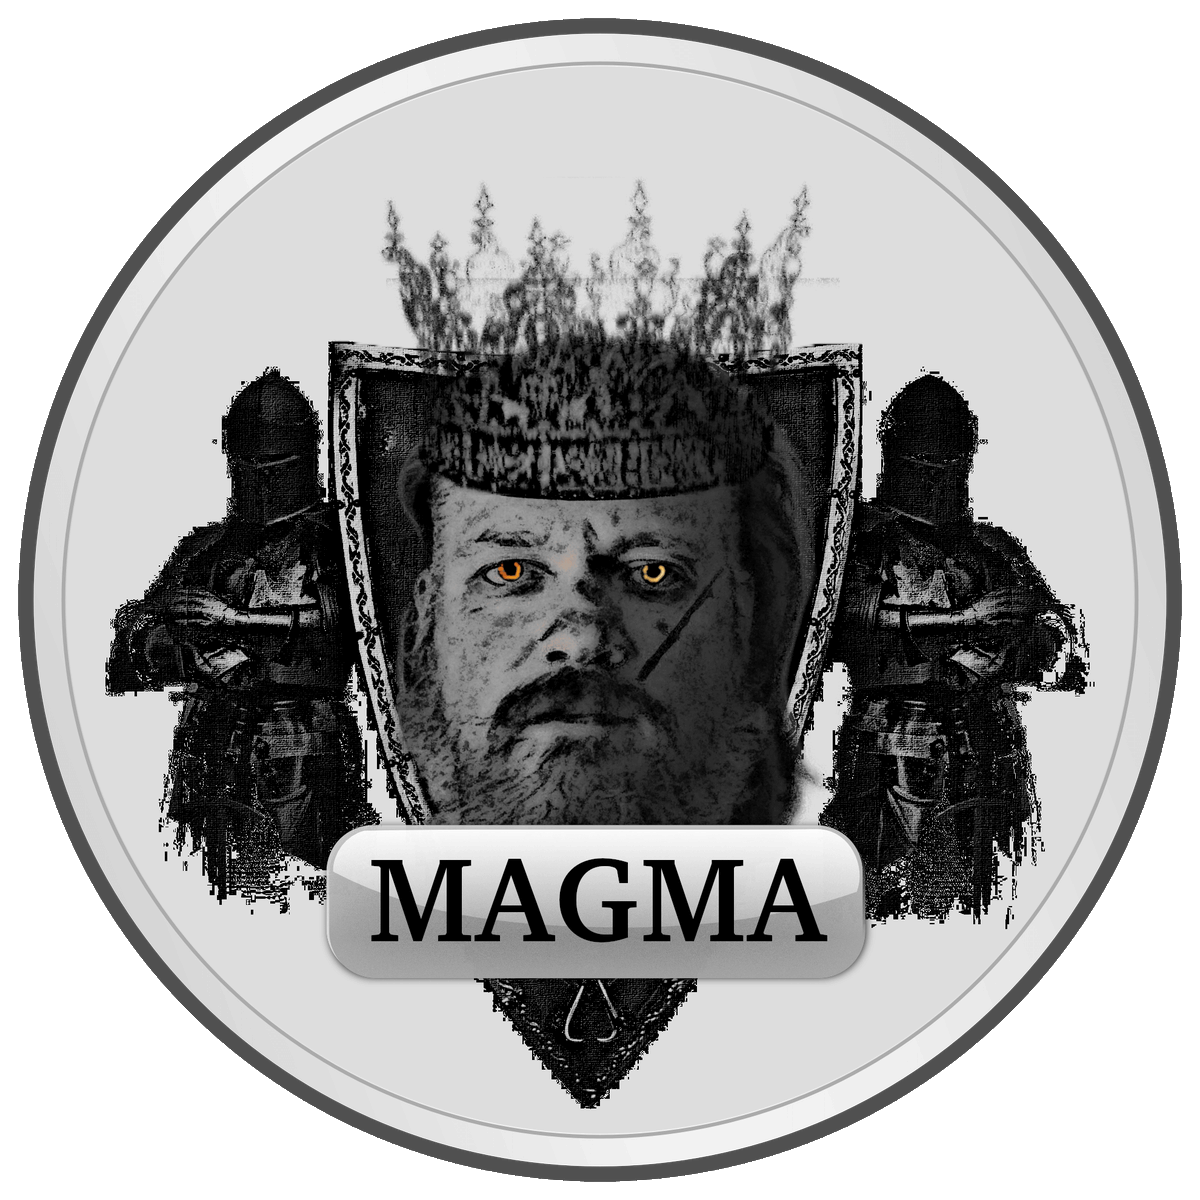 The Royalty Collection by MAGMA is on ALGOGEMS💎

algogems.io/collection/3681

These NFTS pay rewards in MAGMA DAILY!

Add MAGMA to your wallet ASA ID #445362421, and go buy one now!

#magma_army
#Algorand 
#algofam 
#AlgoNFT 
#cryptocurrecy 
#royaltycollection
#royaltynft